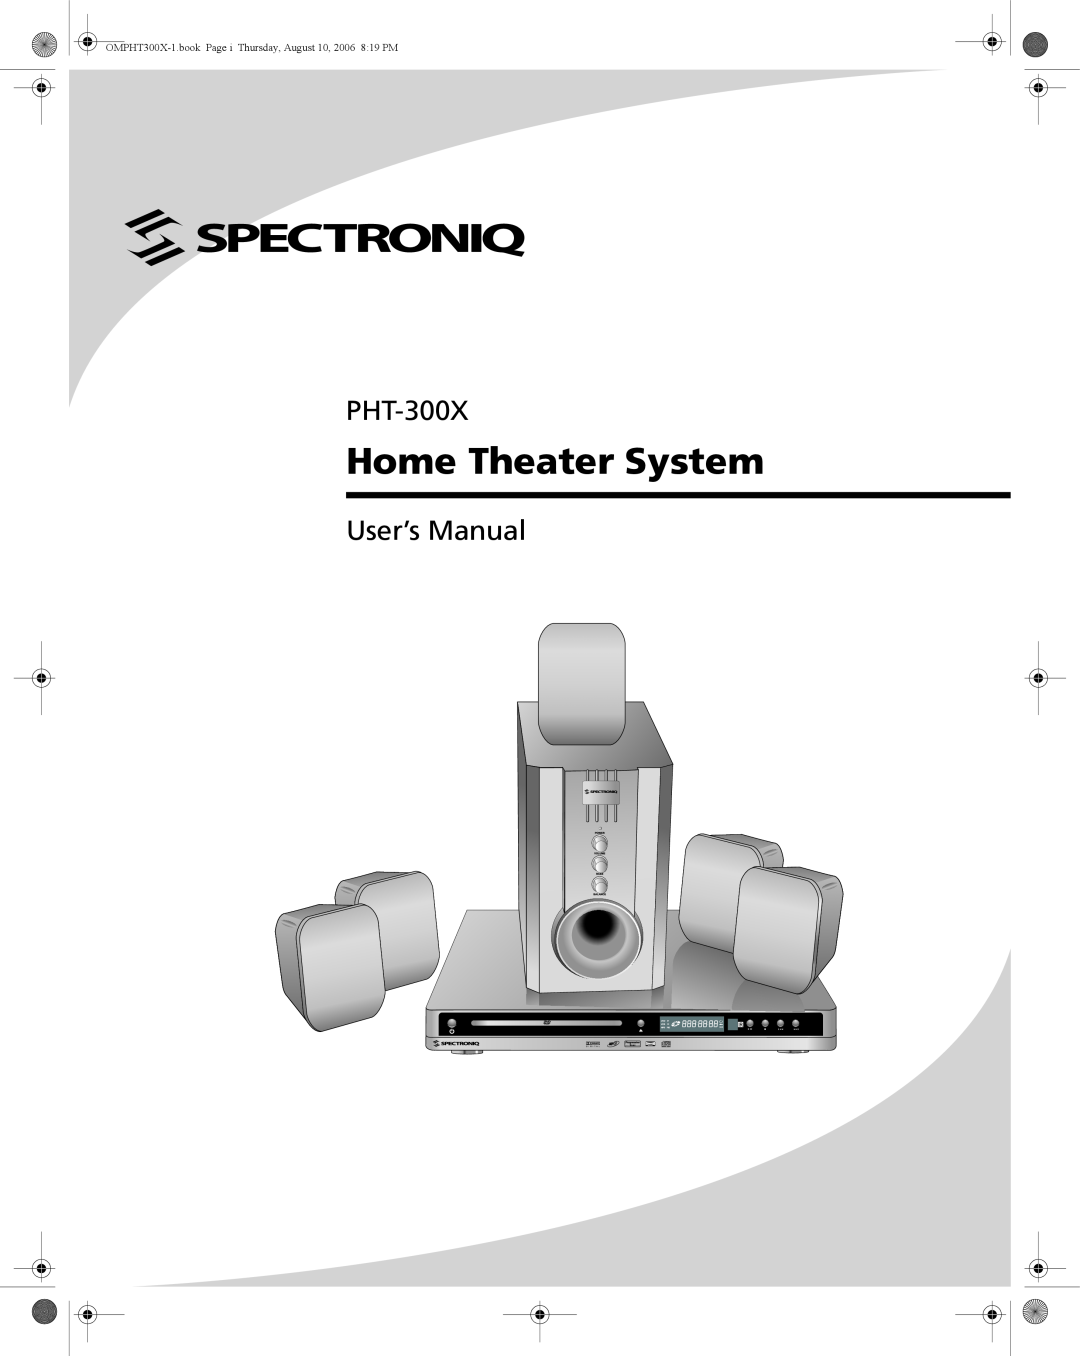 SpectronIQ PHT-300X user manual Home Theater System 